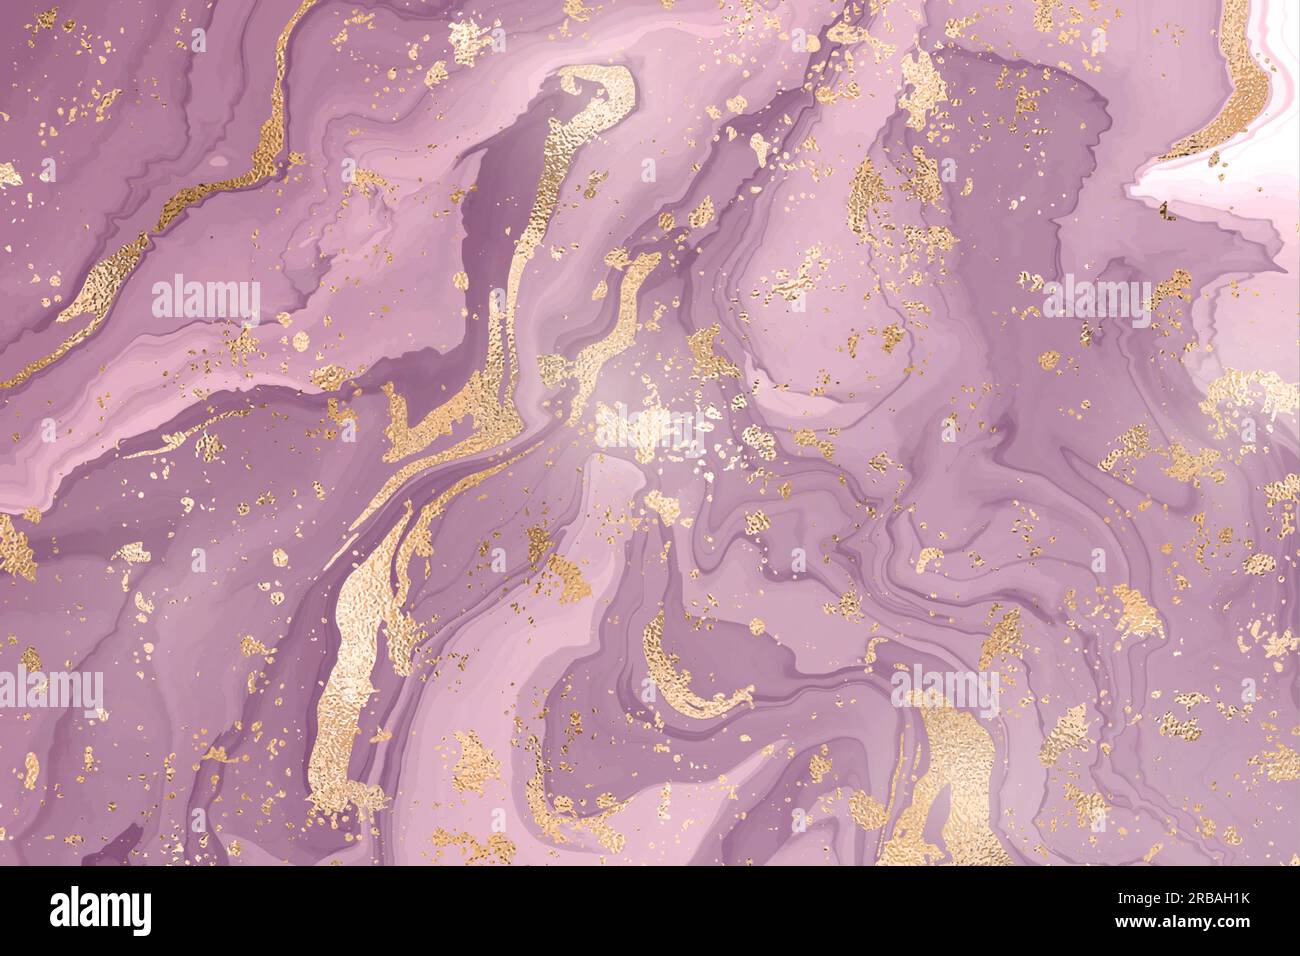 https://c8.alamy.com/comp/2RBAH1K/abstract-dusty-violet-liquid-marble-or-watercolor-background-with-gold-glitter-stripes-and-stains-purple-marble-alcohol-ink-drawing-effect-vector-il-2RBAH1K.jpg